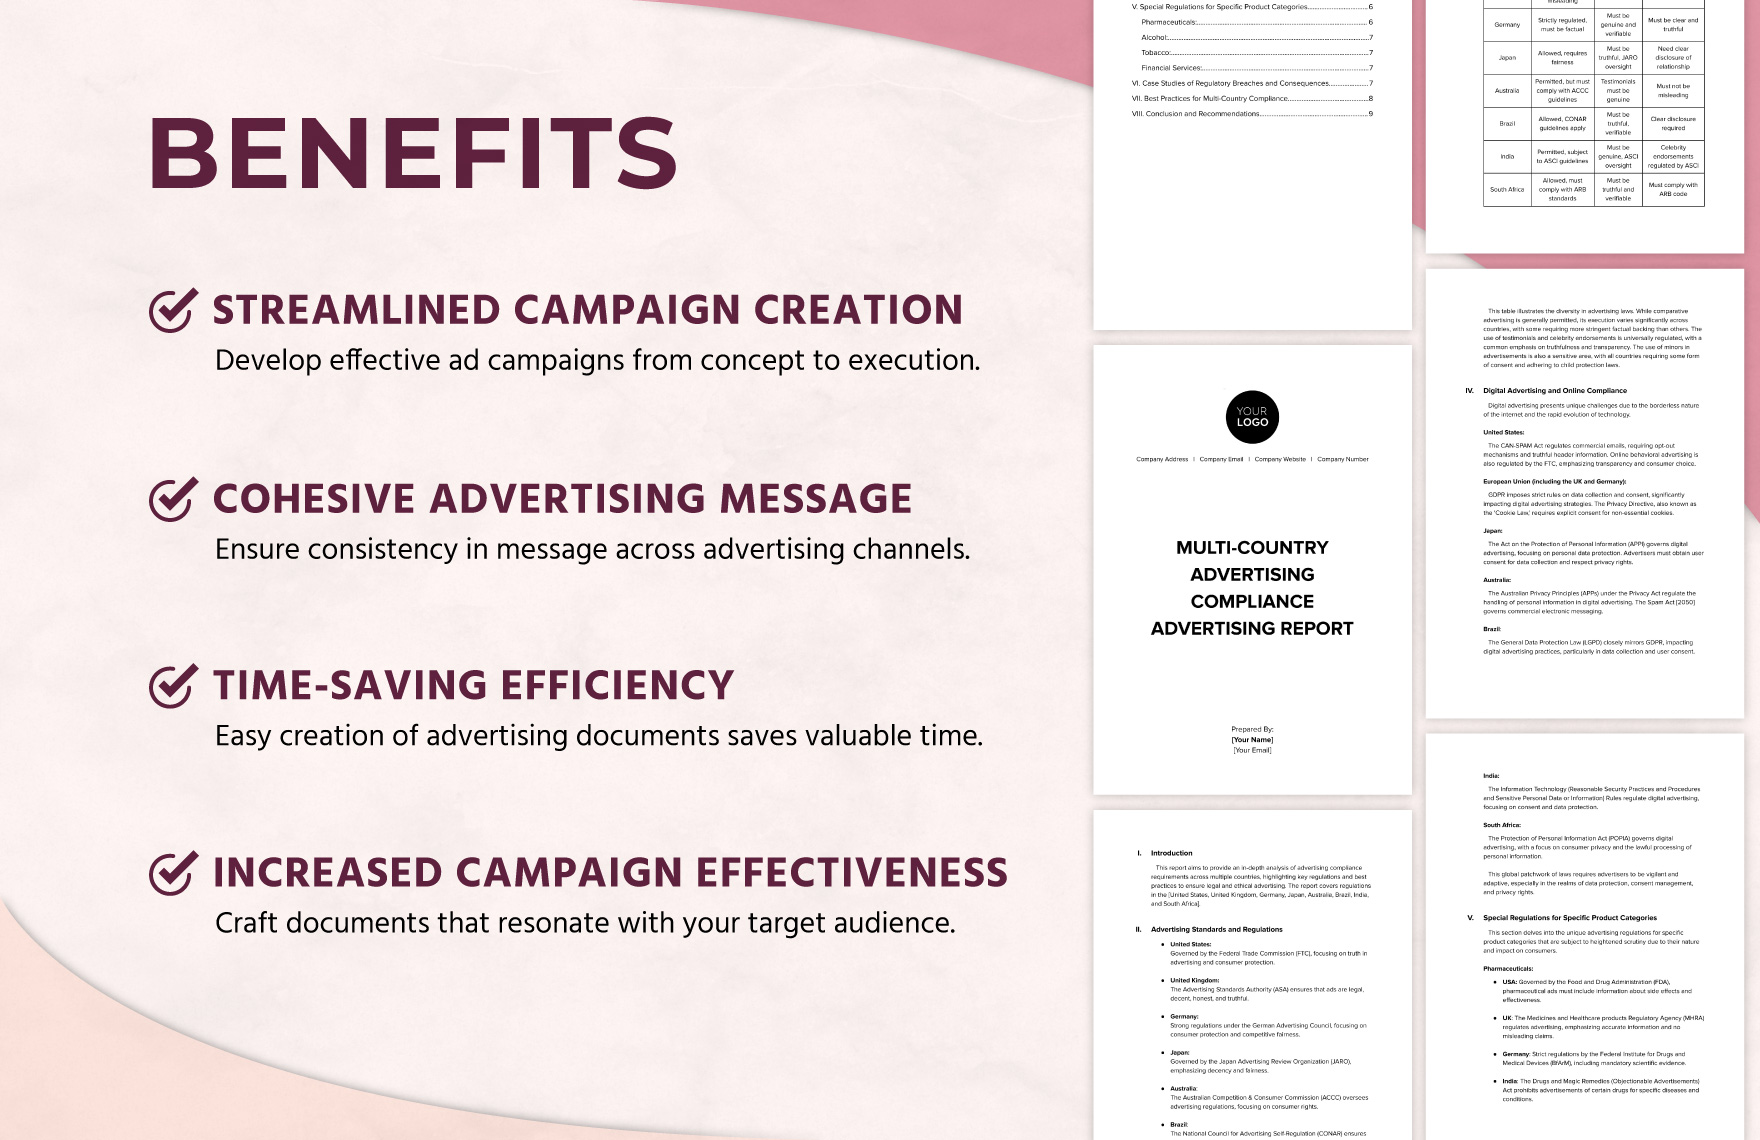 Multi-Country Advertising Compliance Advertising Report Template